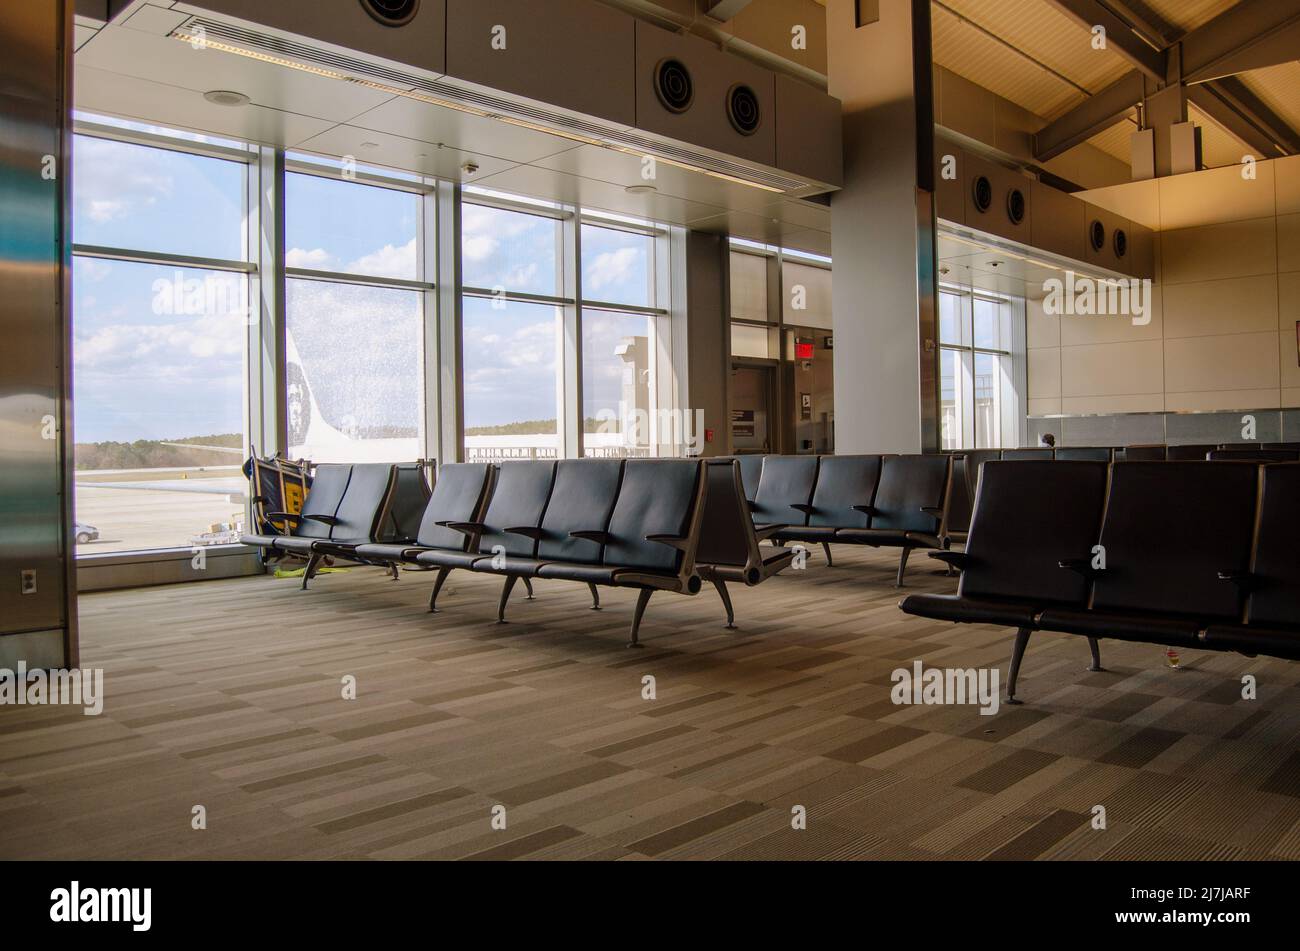 Empty airport seats in the waiting terminal Stock Photo